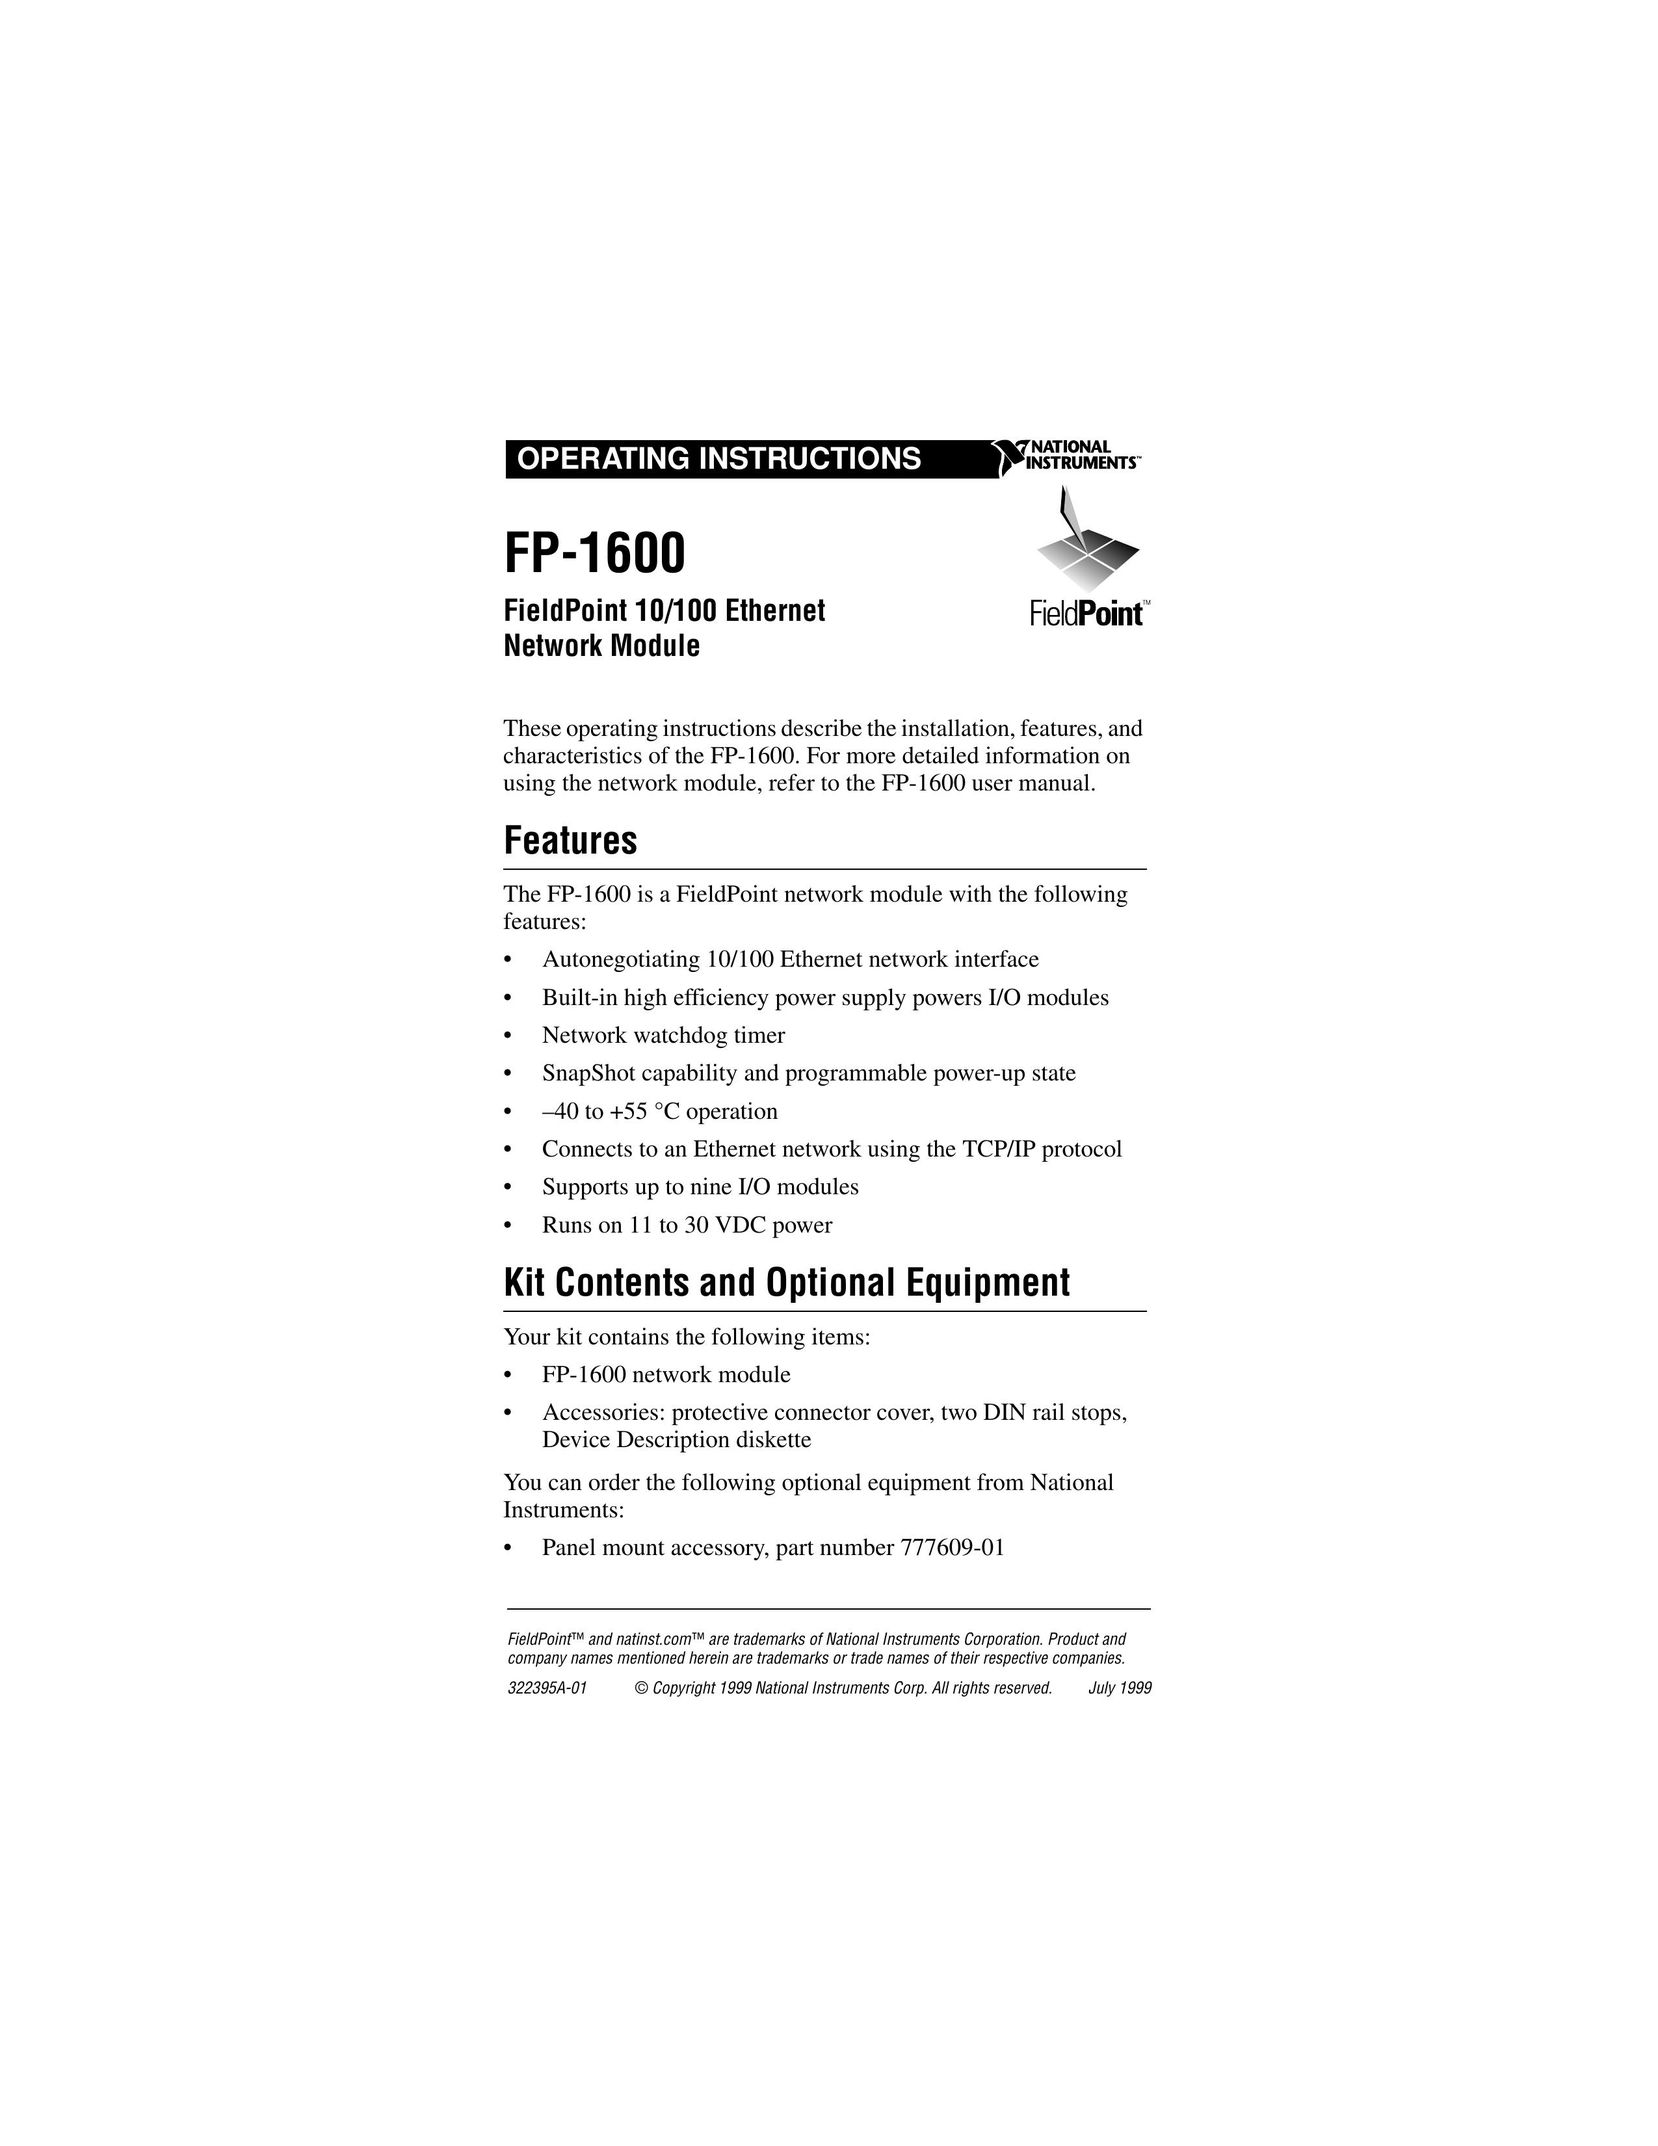 National Instruments FP-1600 Network Card User Manual